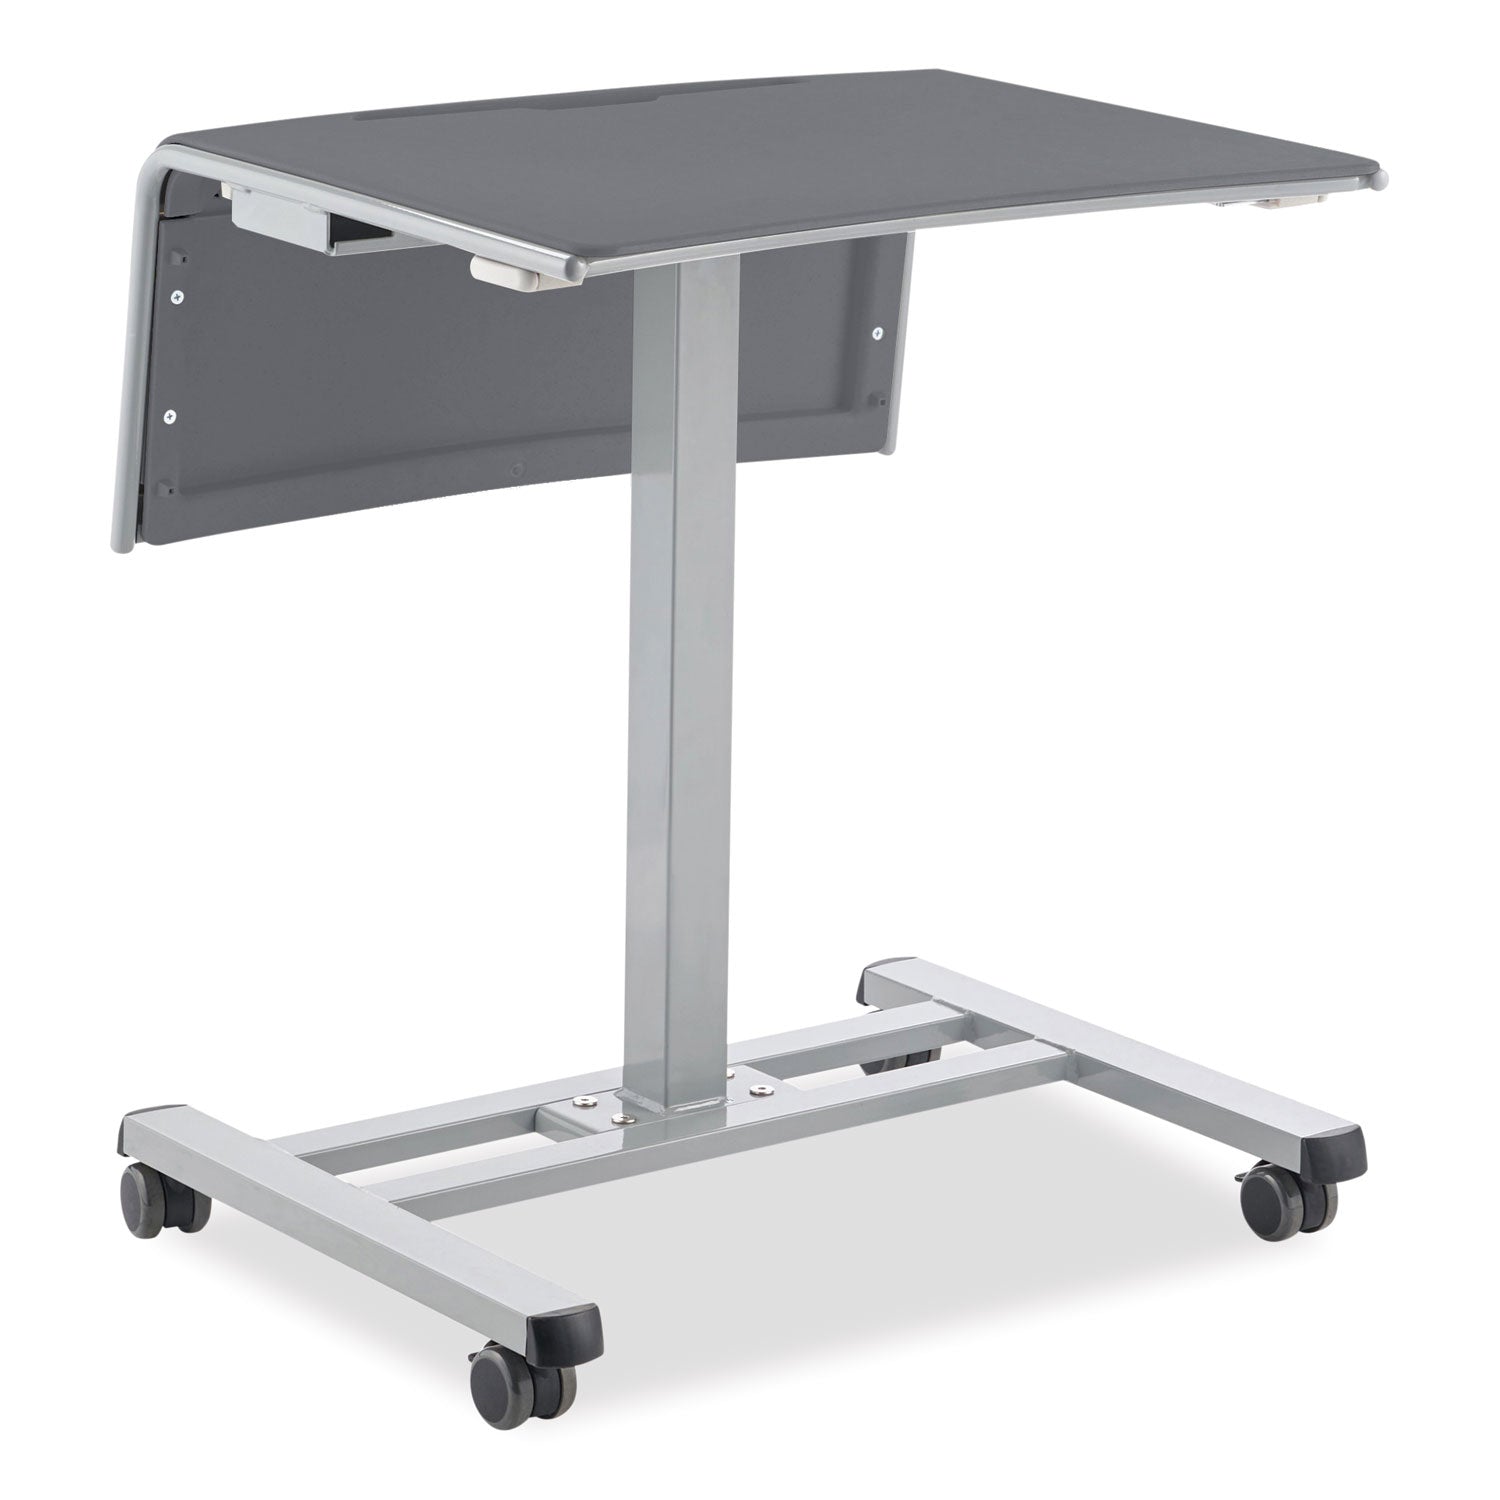 sit-stand-student-desk-pro-235-x-195-x-285-to-4175-charcoal-gray-ships-in-1-3-business-days_npsssdg20 - 2